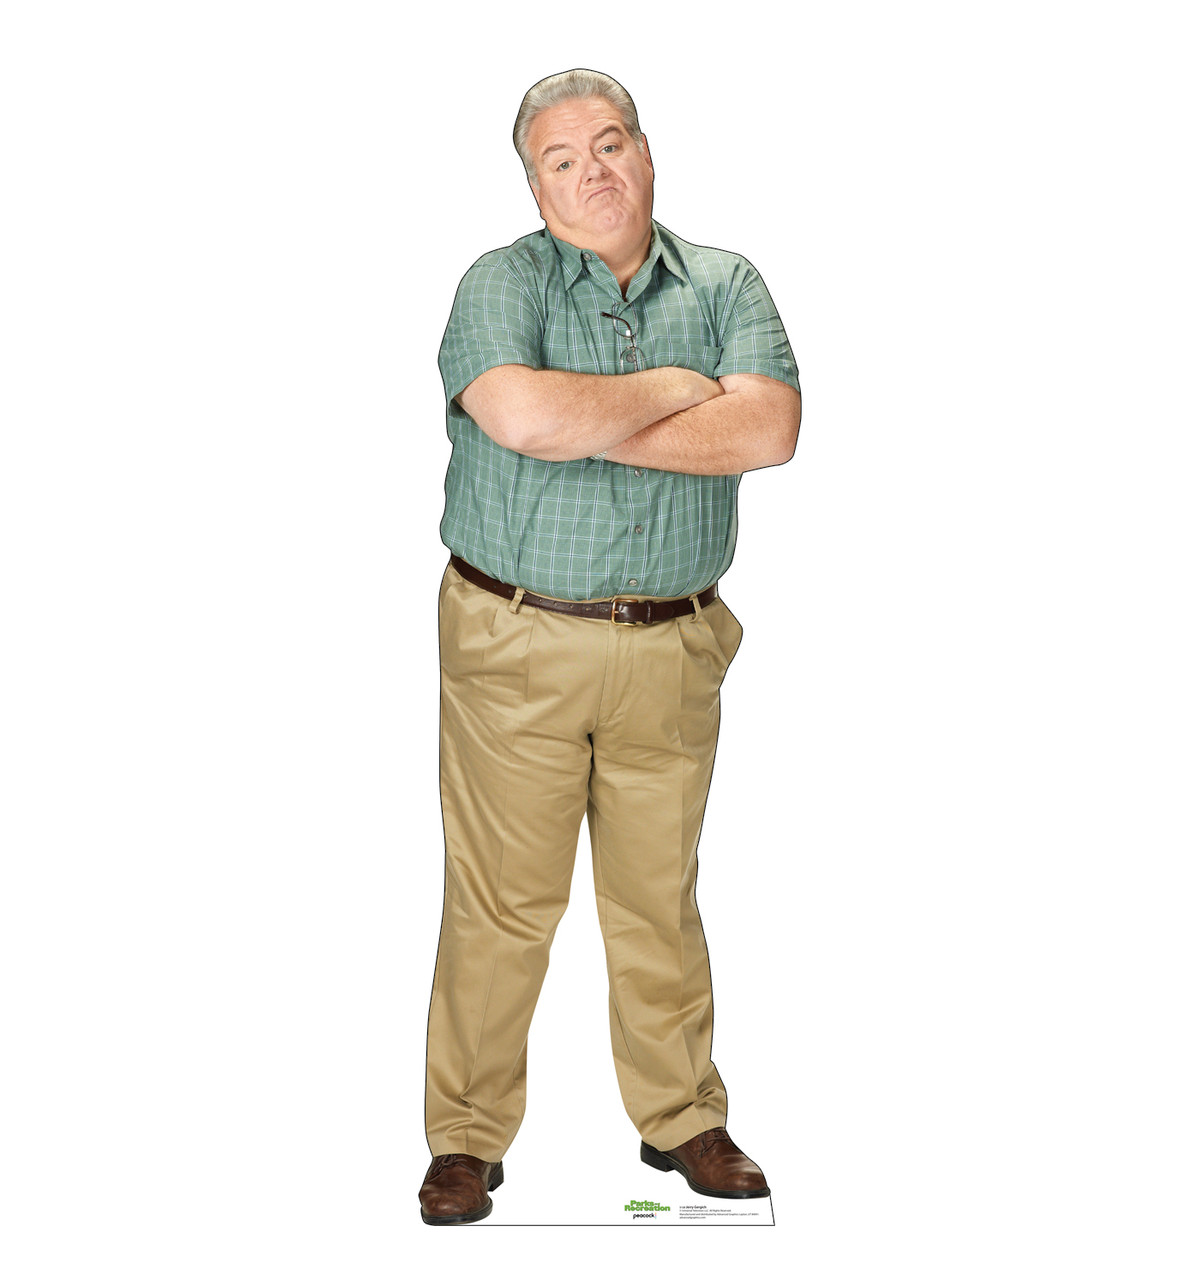 Life-size cardboard standee of Jerry Gergich.